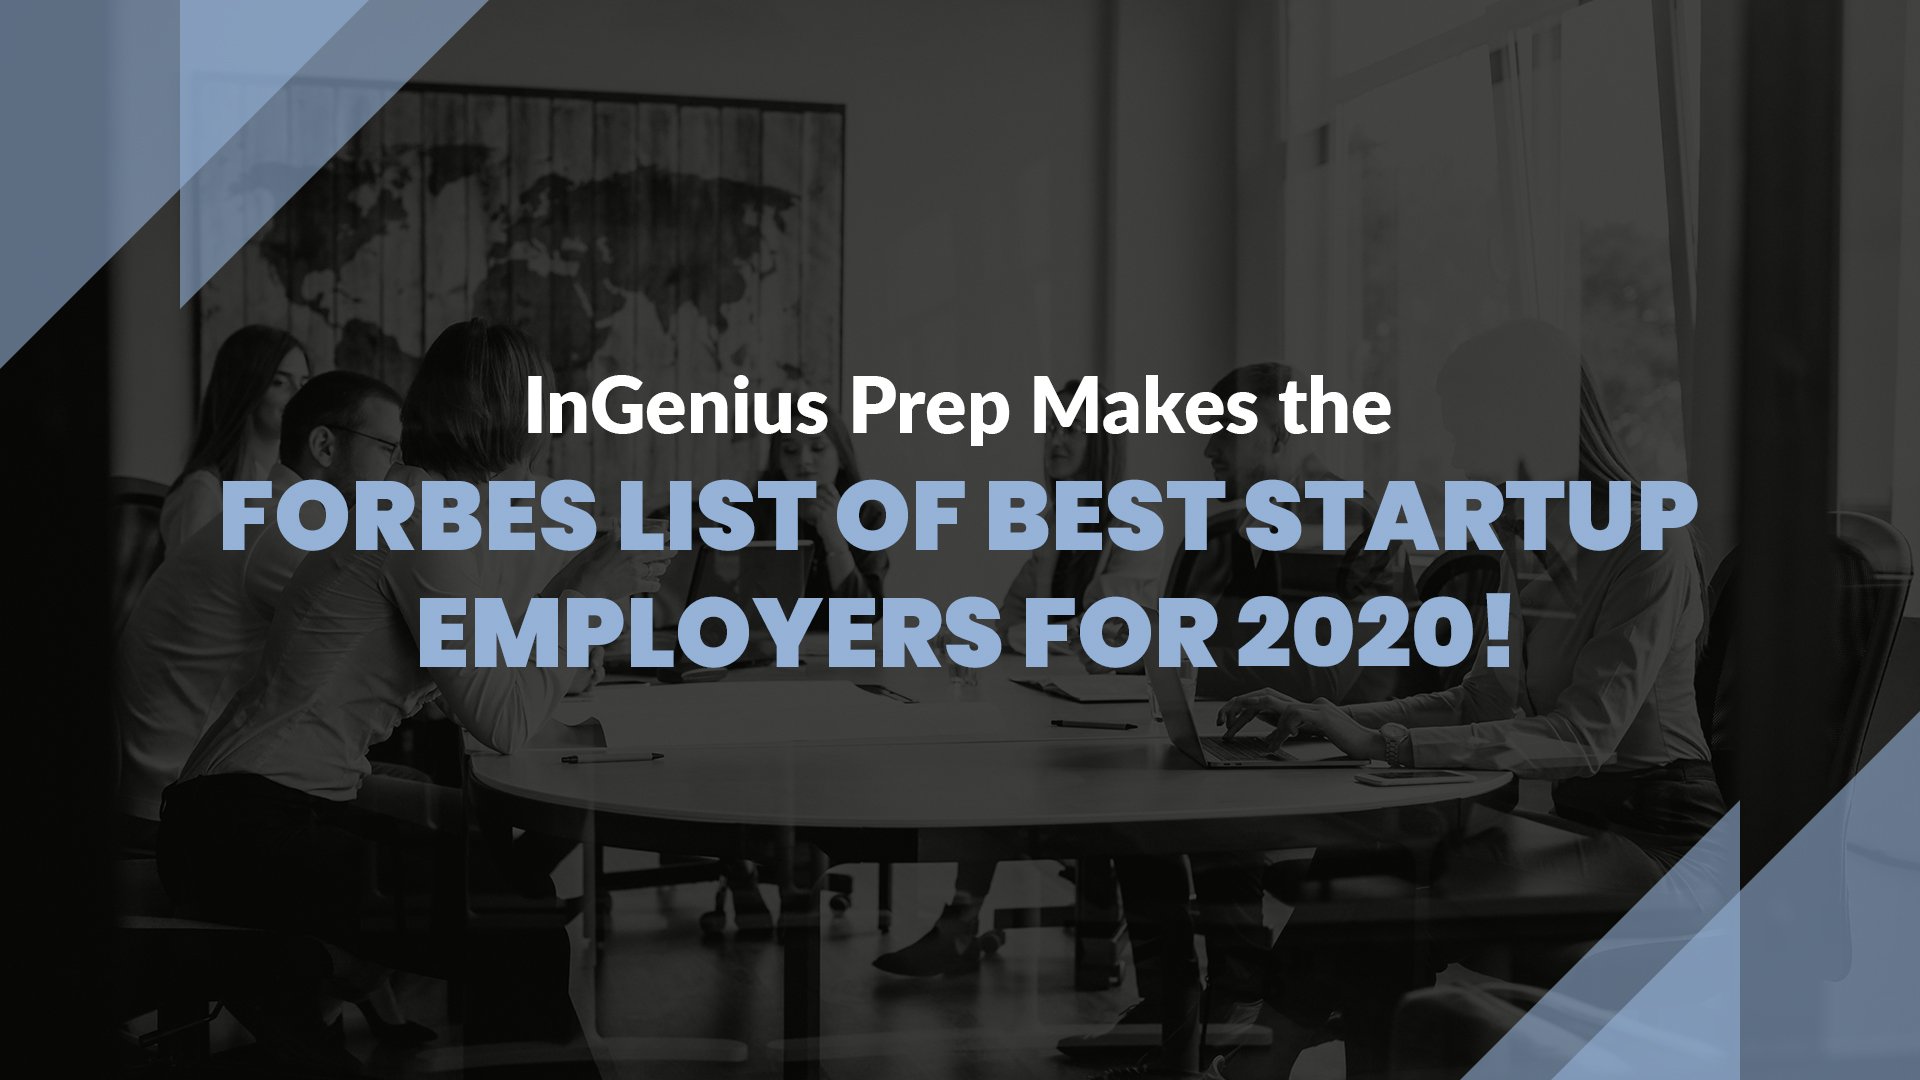 InGenius Prep Makes the Forbes List of Best Startup Employers for 2020!